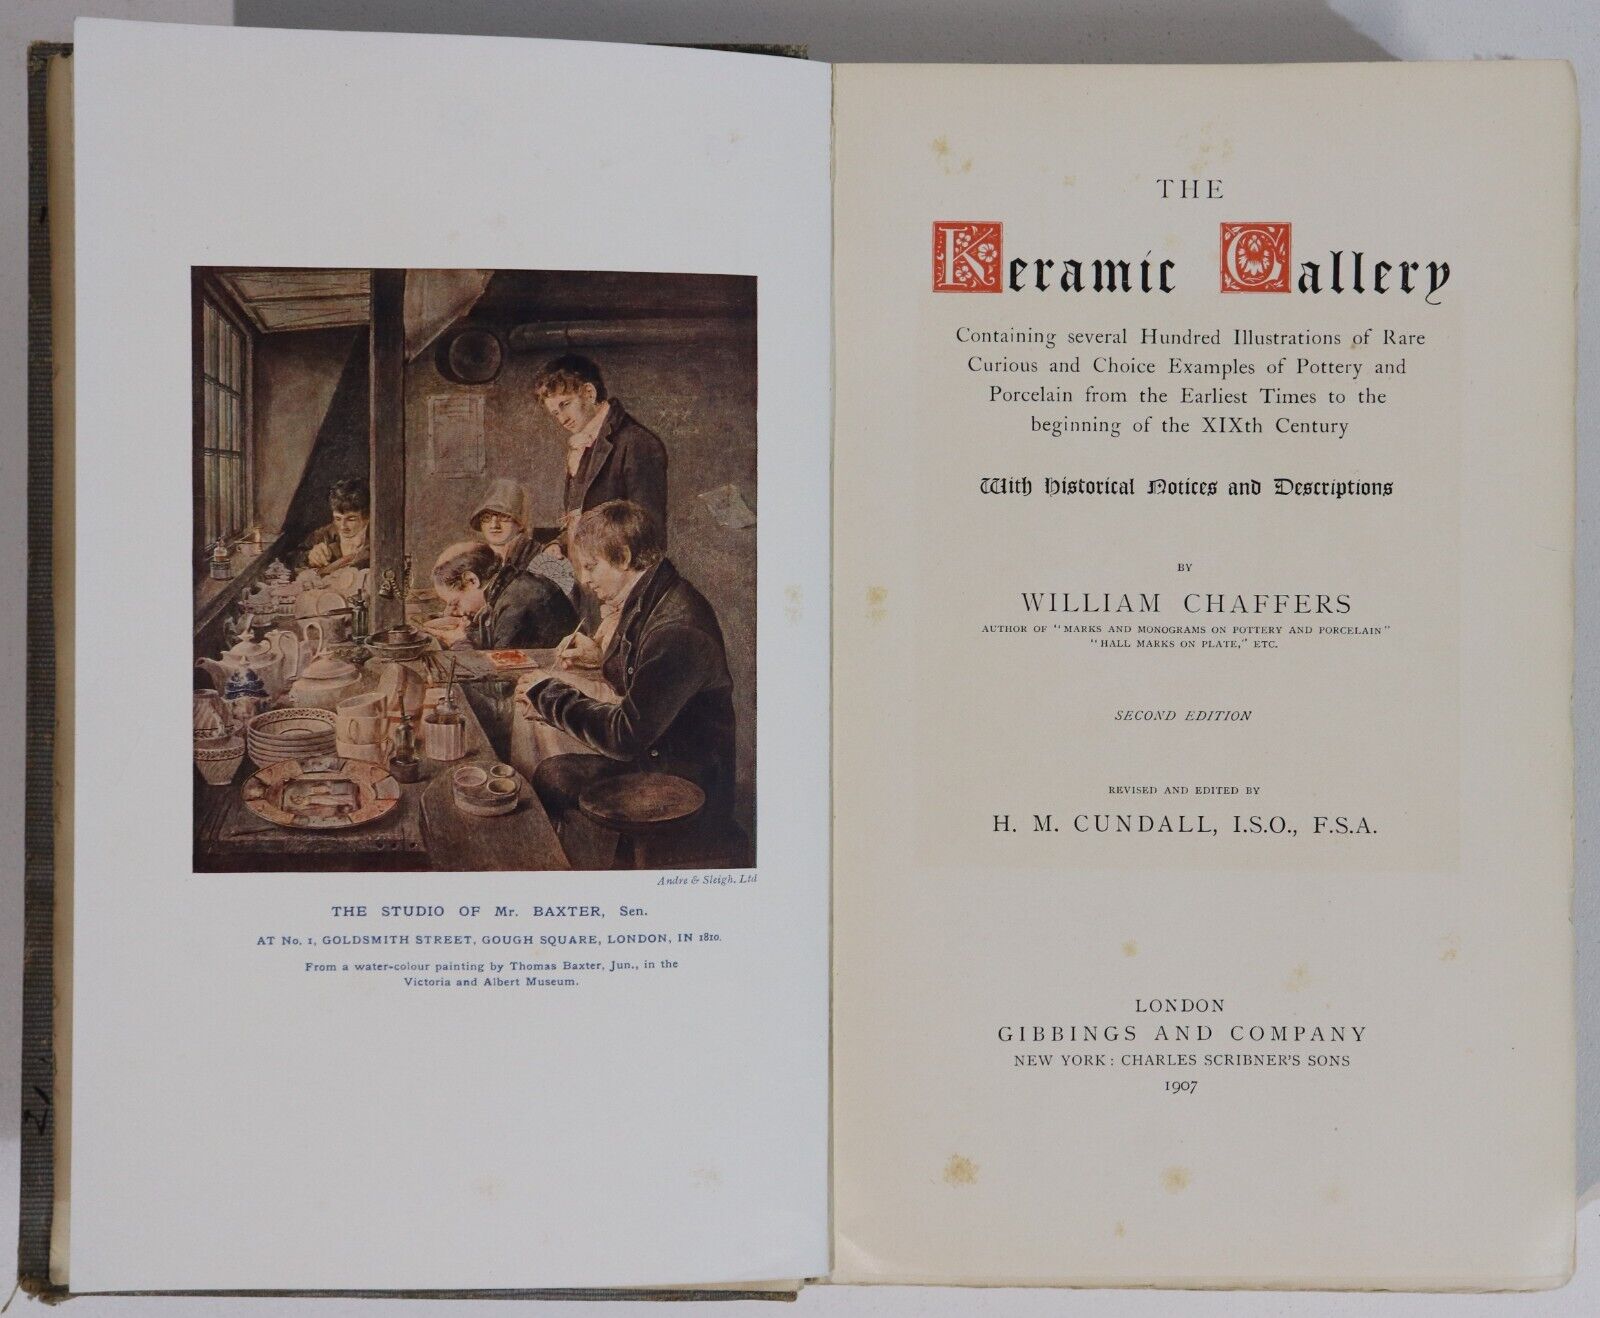 The Keramic Gallery by W. Chaffers - 1907 - Antique & Collectible Reference Book - 0